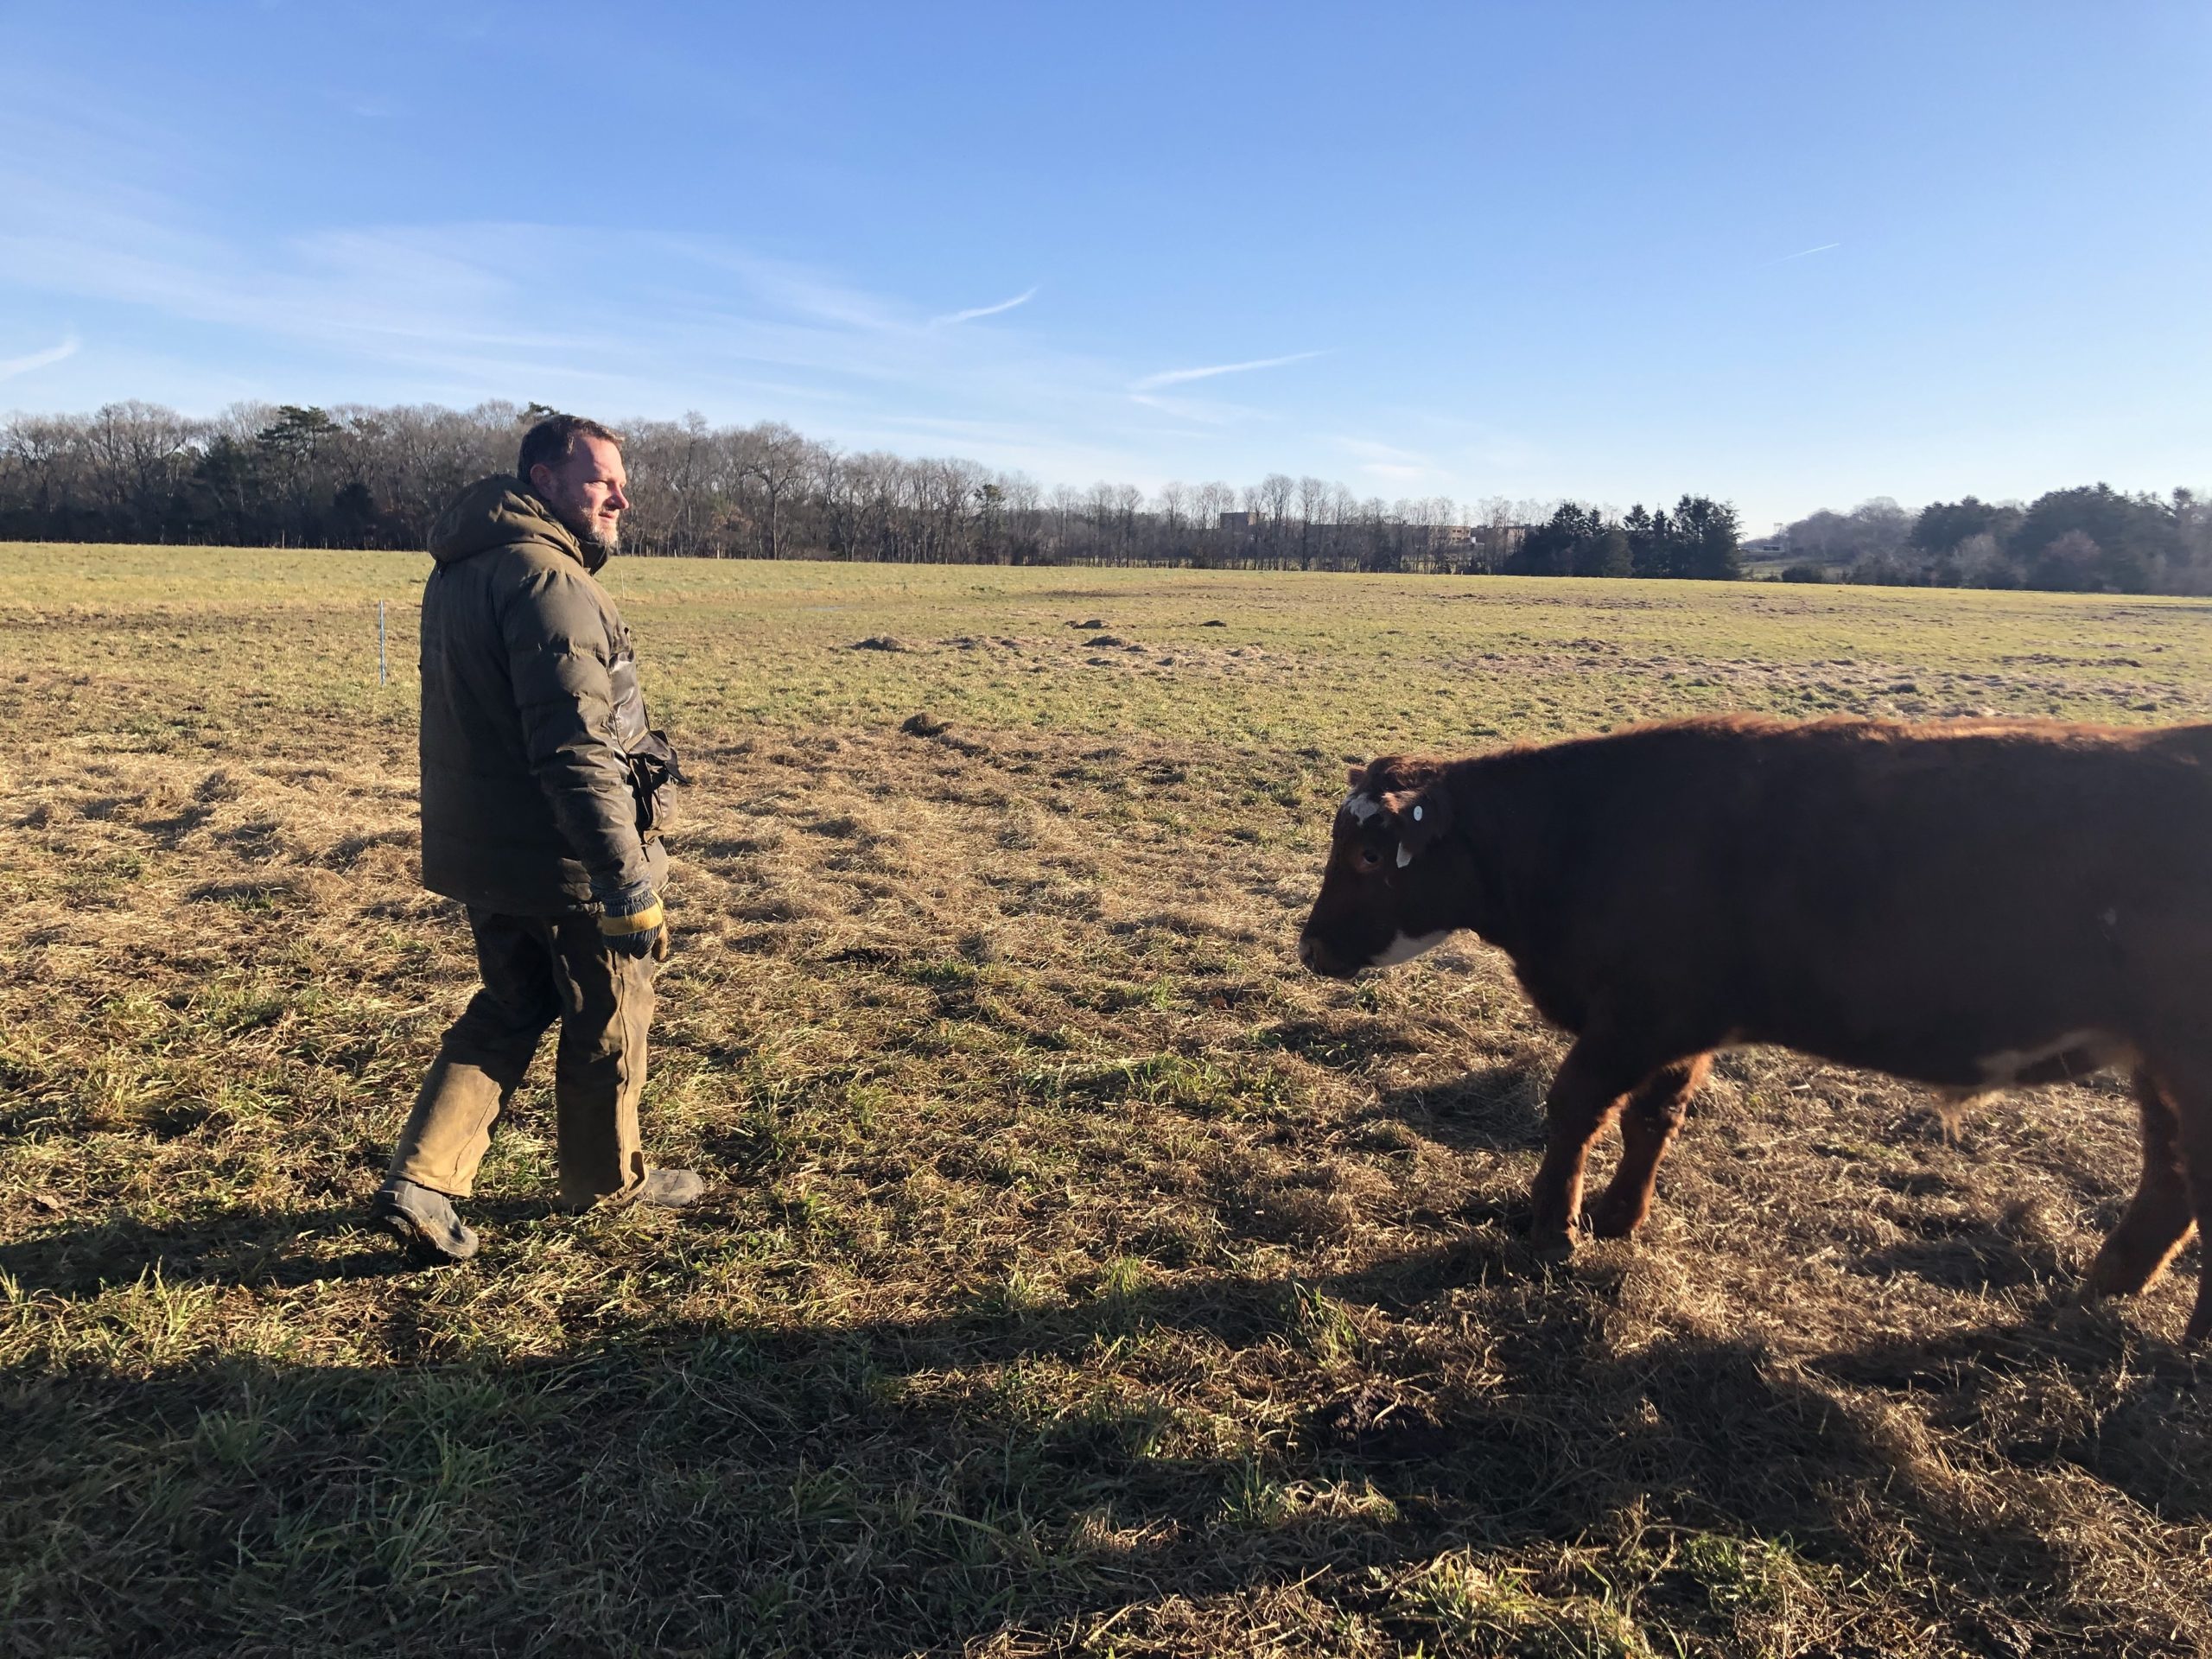 Steven Skrenta of Acabonac Farms says, “Cows like being outside in the Winter.” Label should say “Grass Fed” and “Pasture Finished” or “100% Grass Fed” to legally guarantee that the cow didn’t spend the majority of its life in a feedlot eating unhealthy cattle feed.